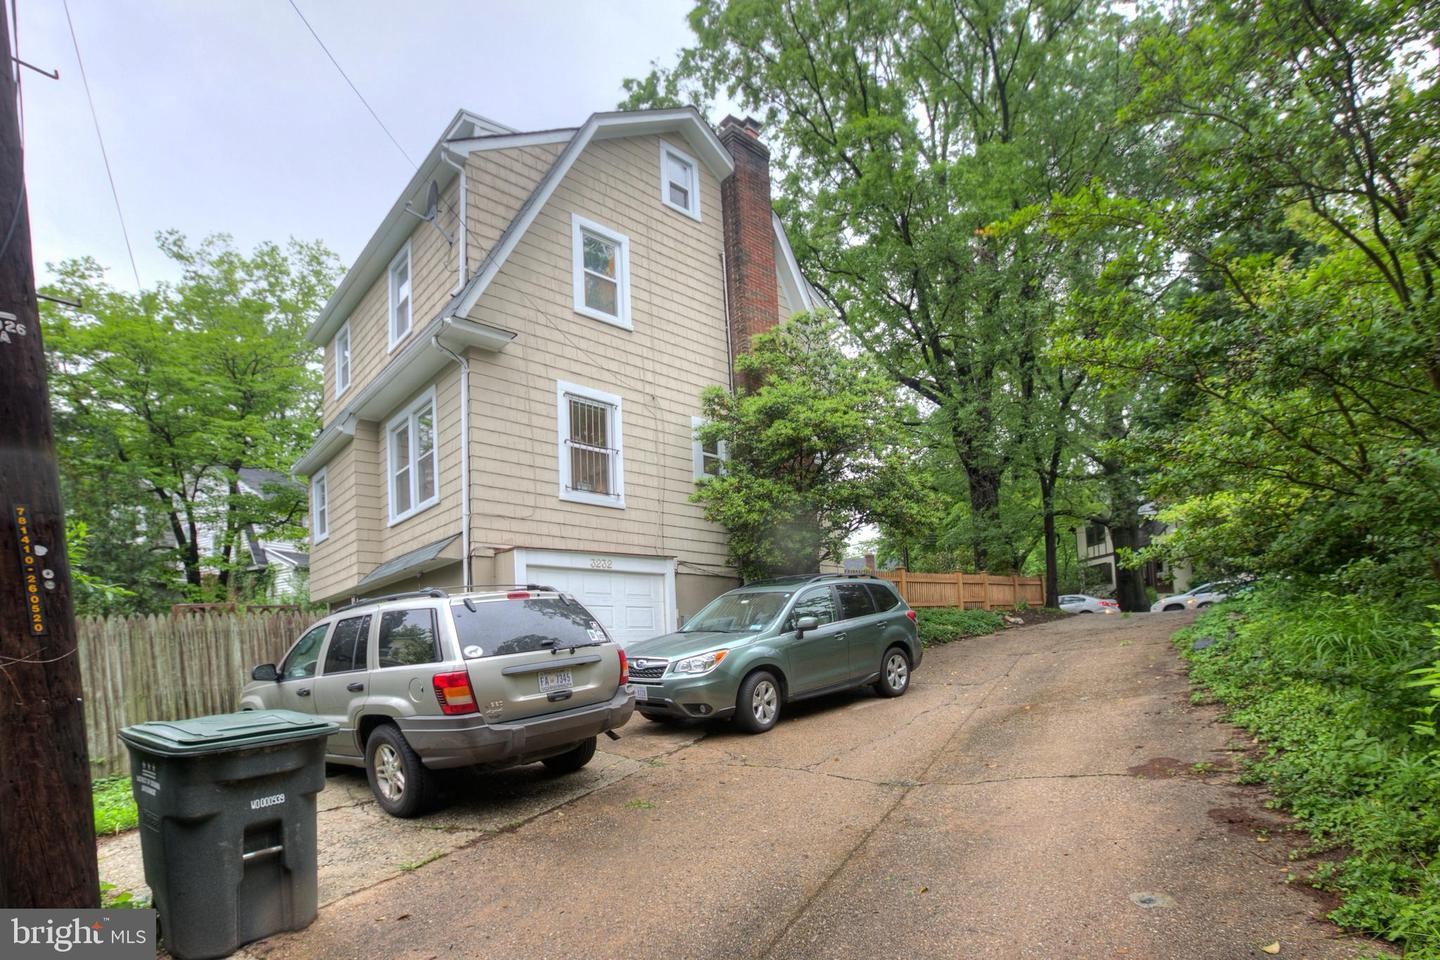 20. 3232 Military Rd NW